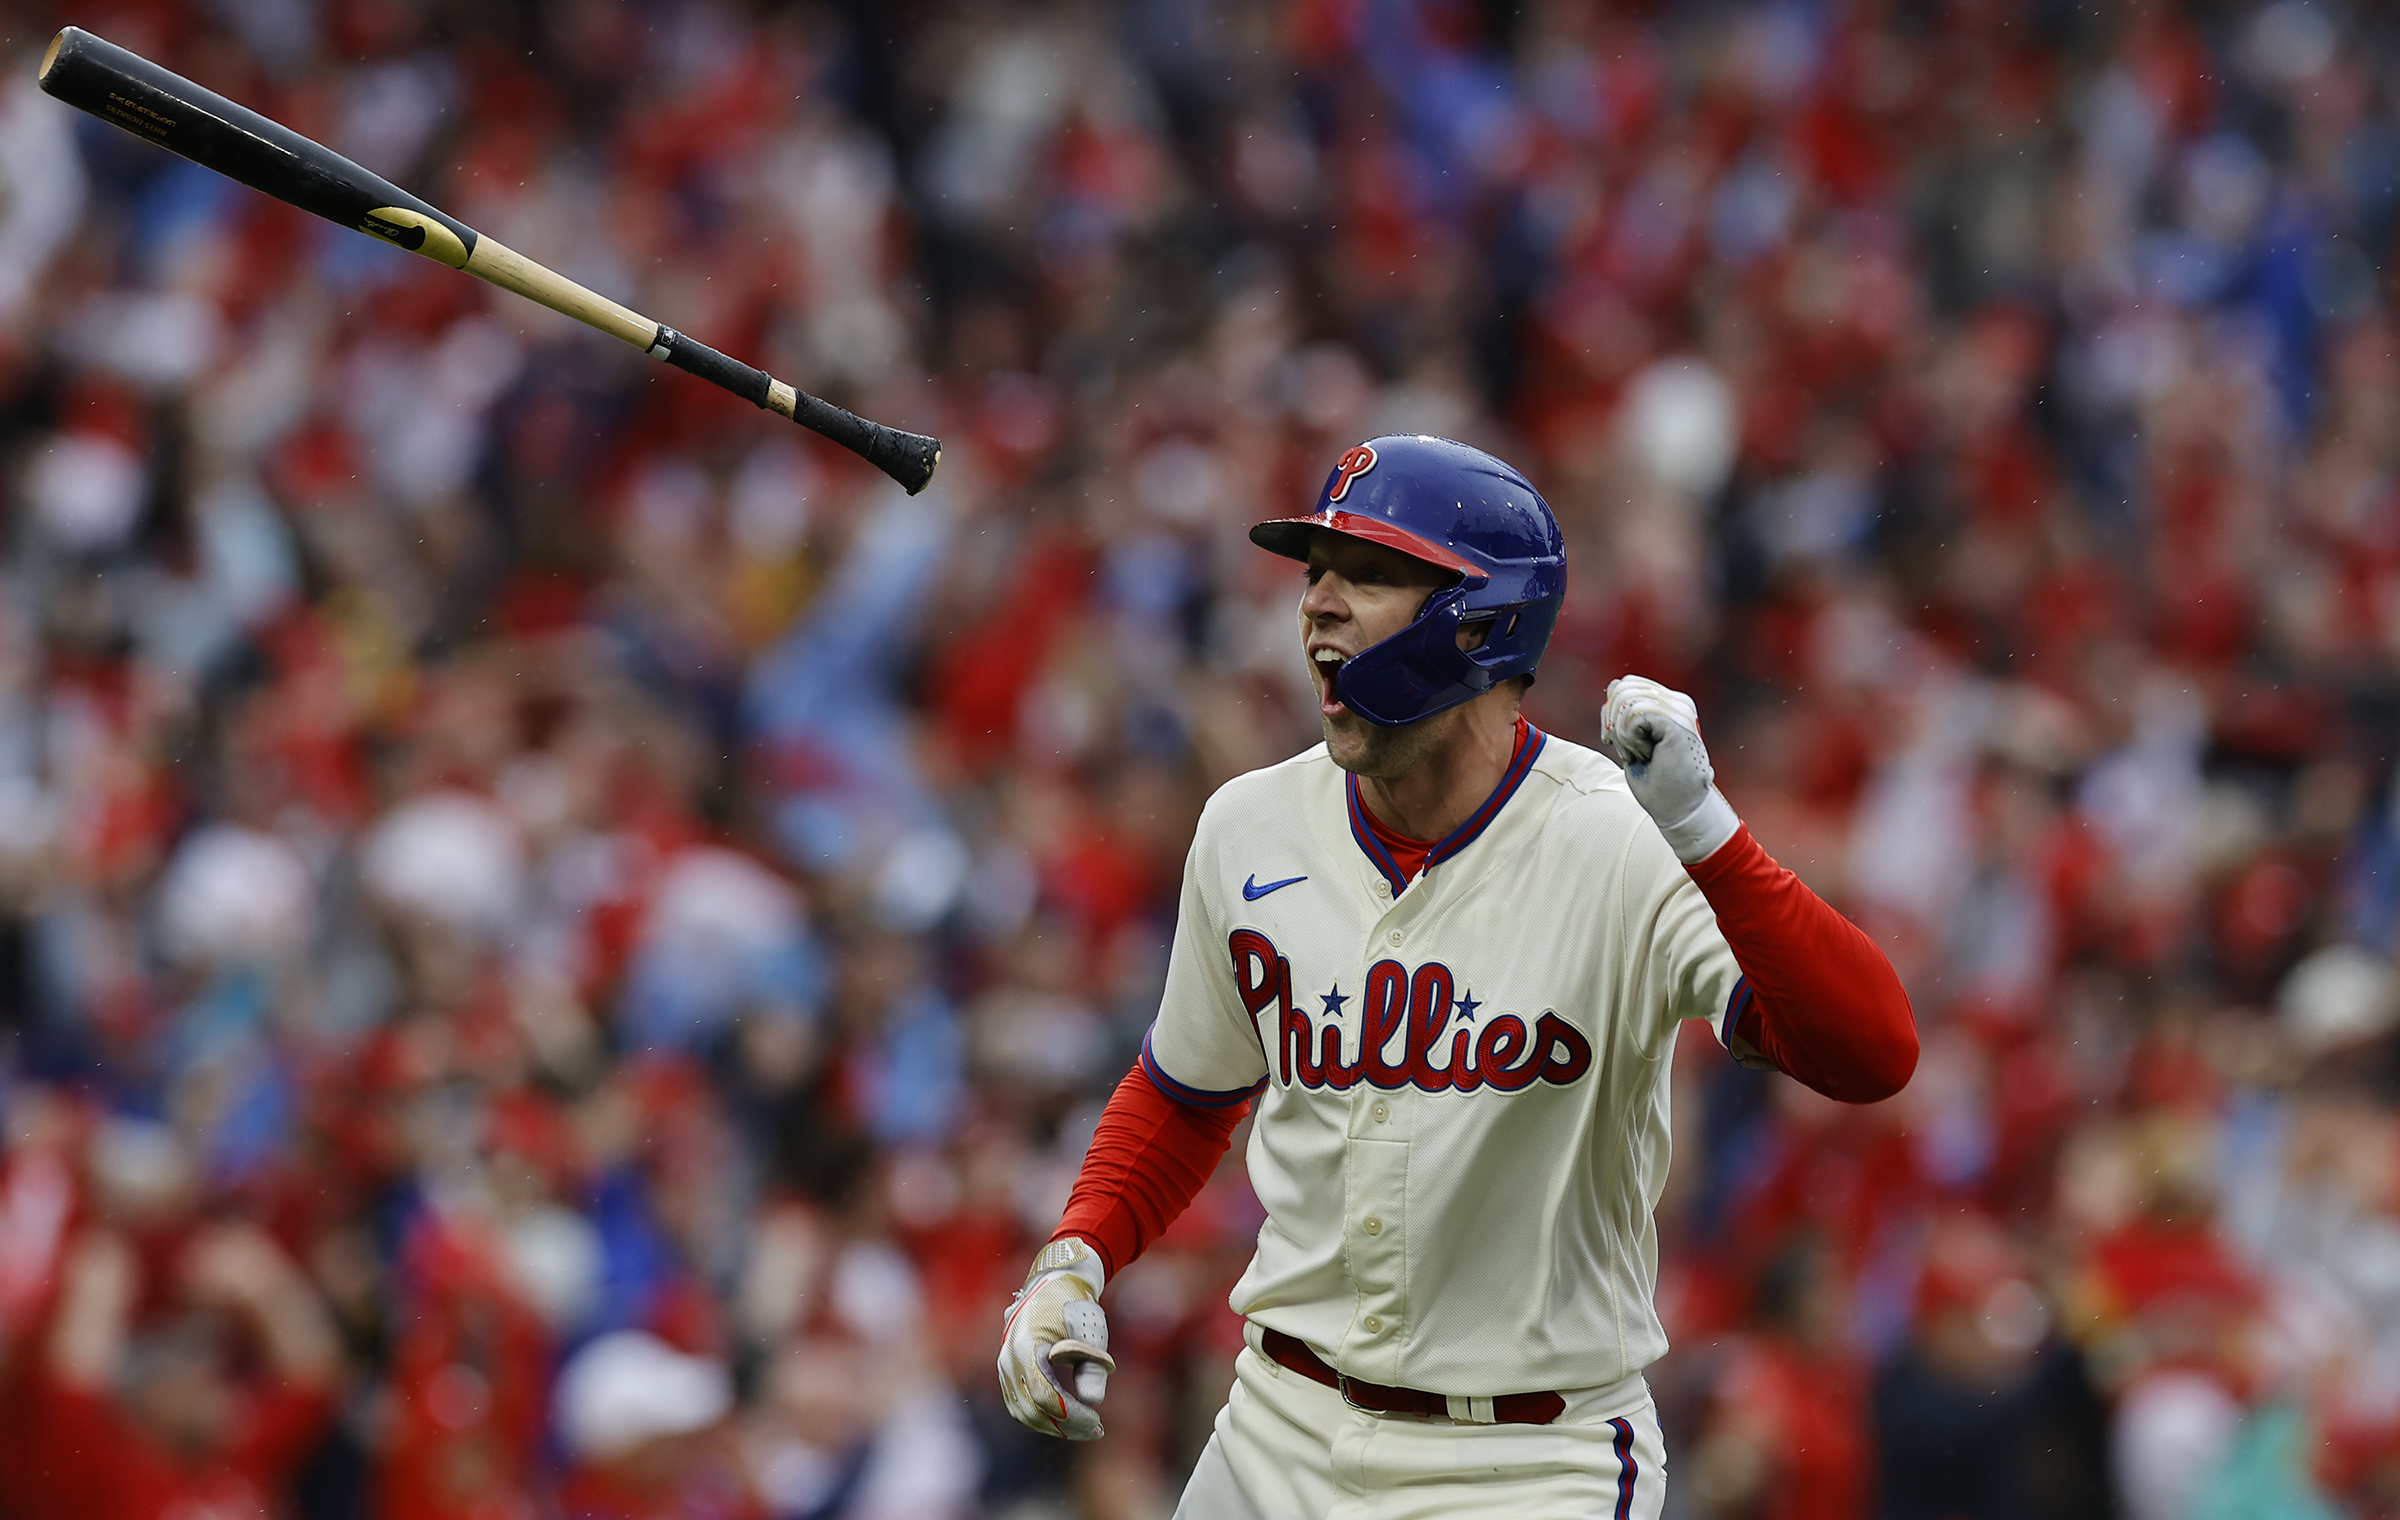 Rhys Hoskins powers Phillies past Blue Jays – The Morning Call